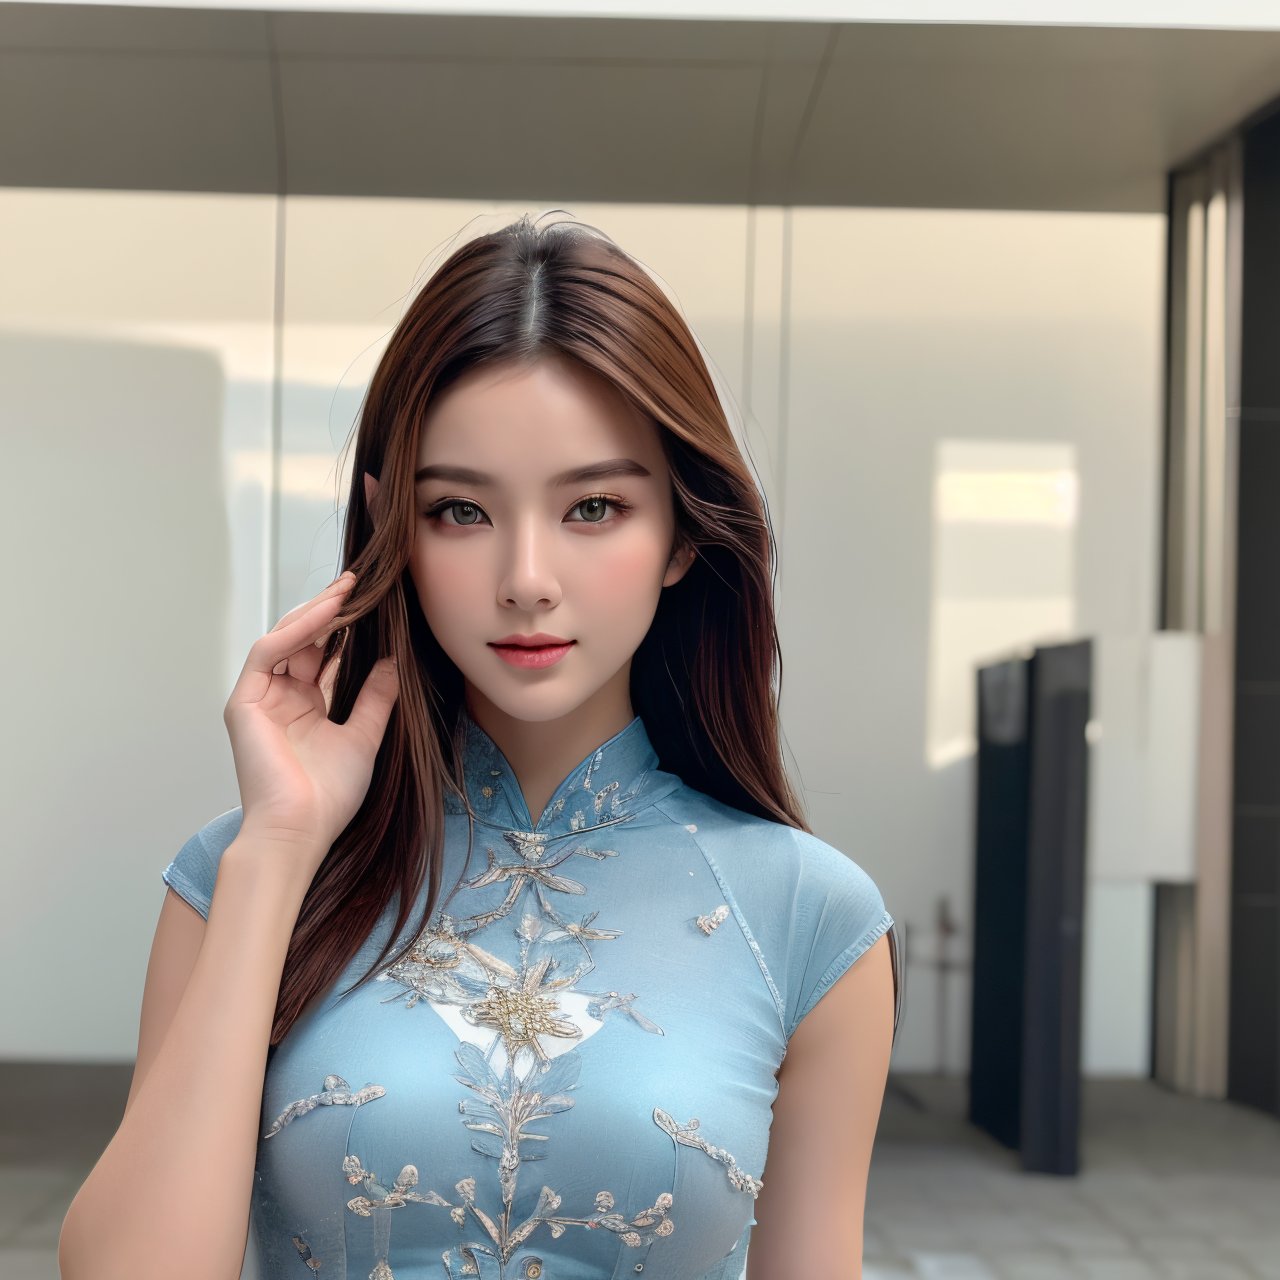 masterpiece,(best quality:1.4),ultra-detailed,1 girl,22yo,wear daily elegant outfit,,high resolution,genuine emotion,wonder beauty ,Enhance, bright colors, summer holiday,Young beauty spirit ,Best face ever in the world,beauty Asian